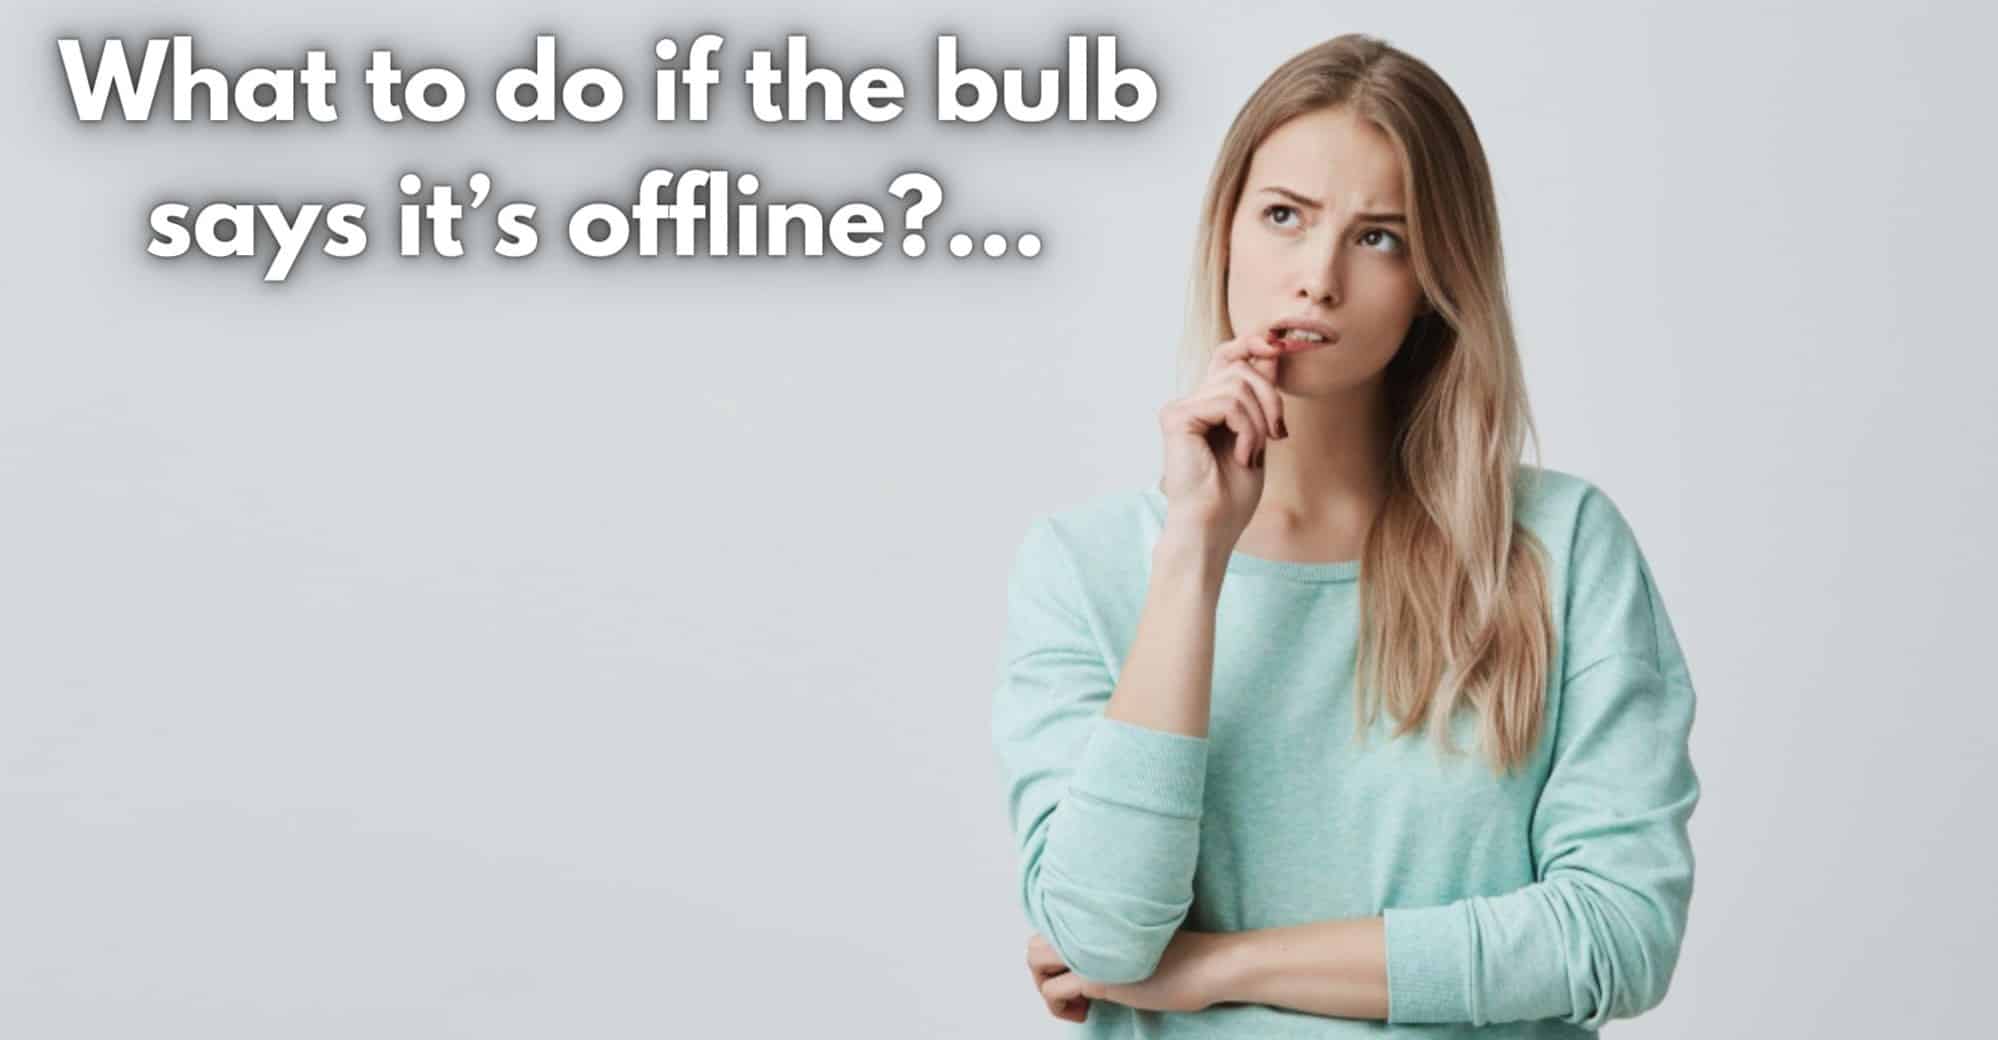 What to do if the bulb says it’s offline